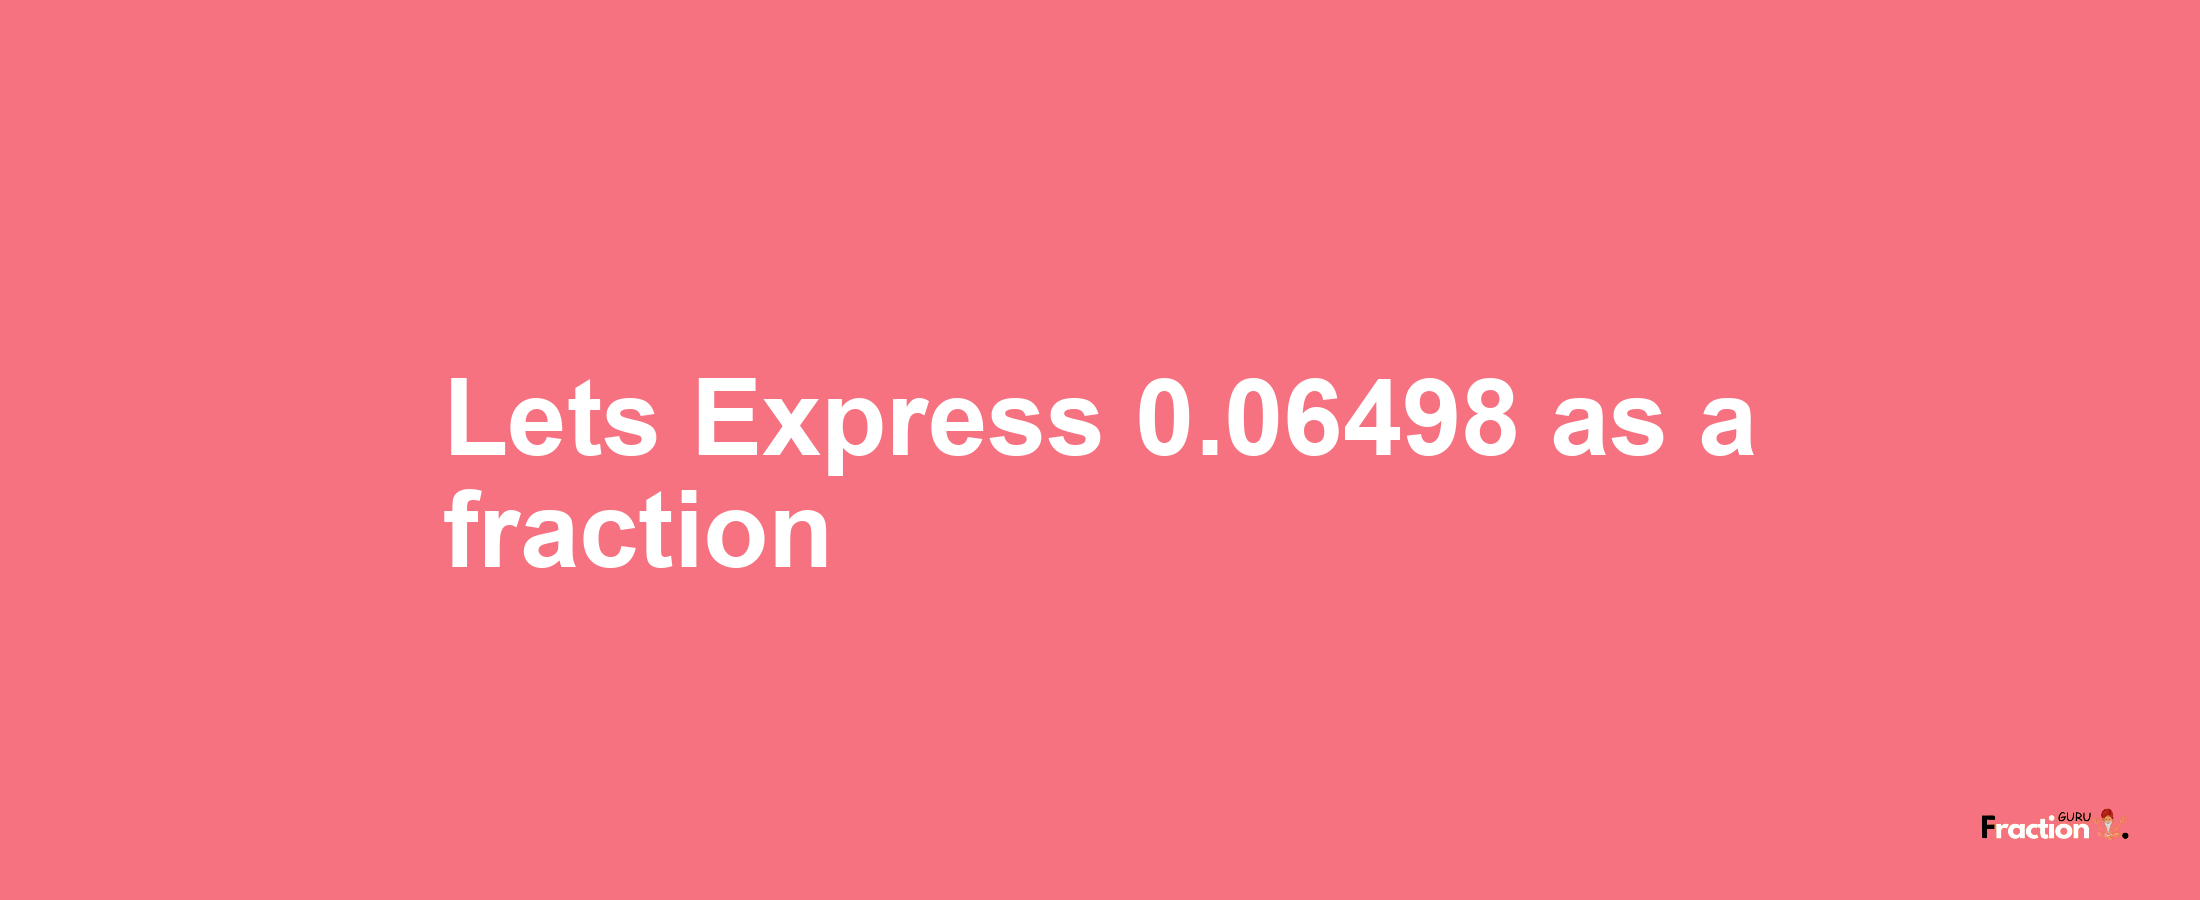 Lets Express 0.06498 as afraction